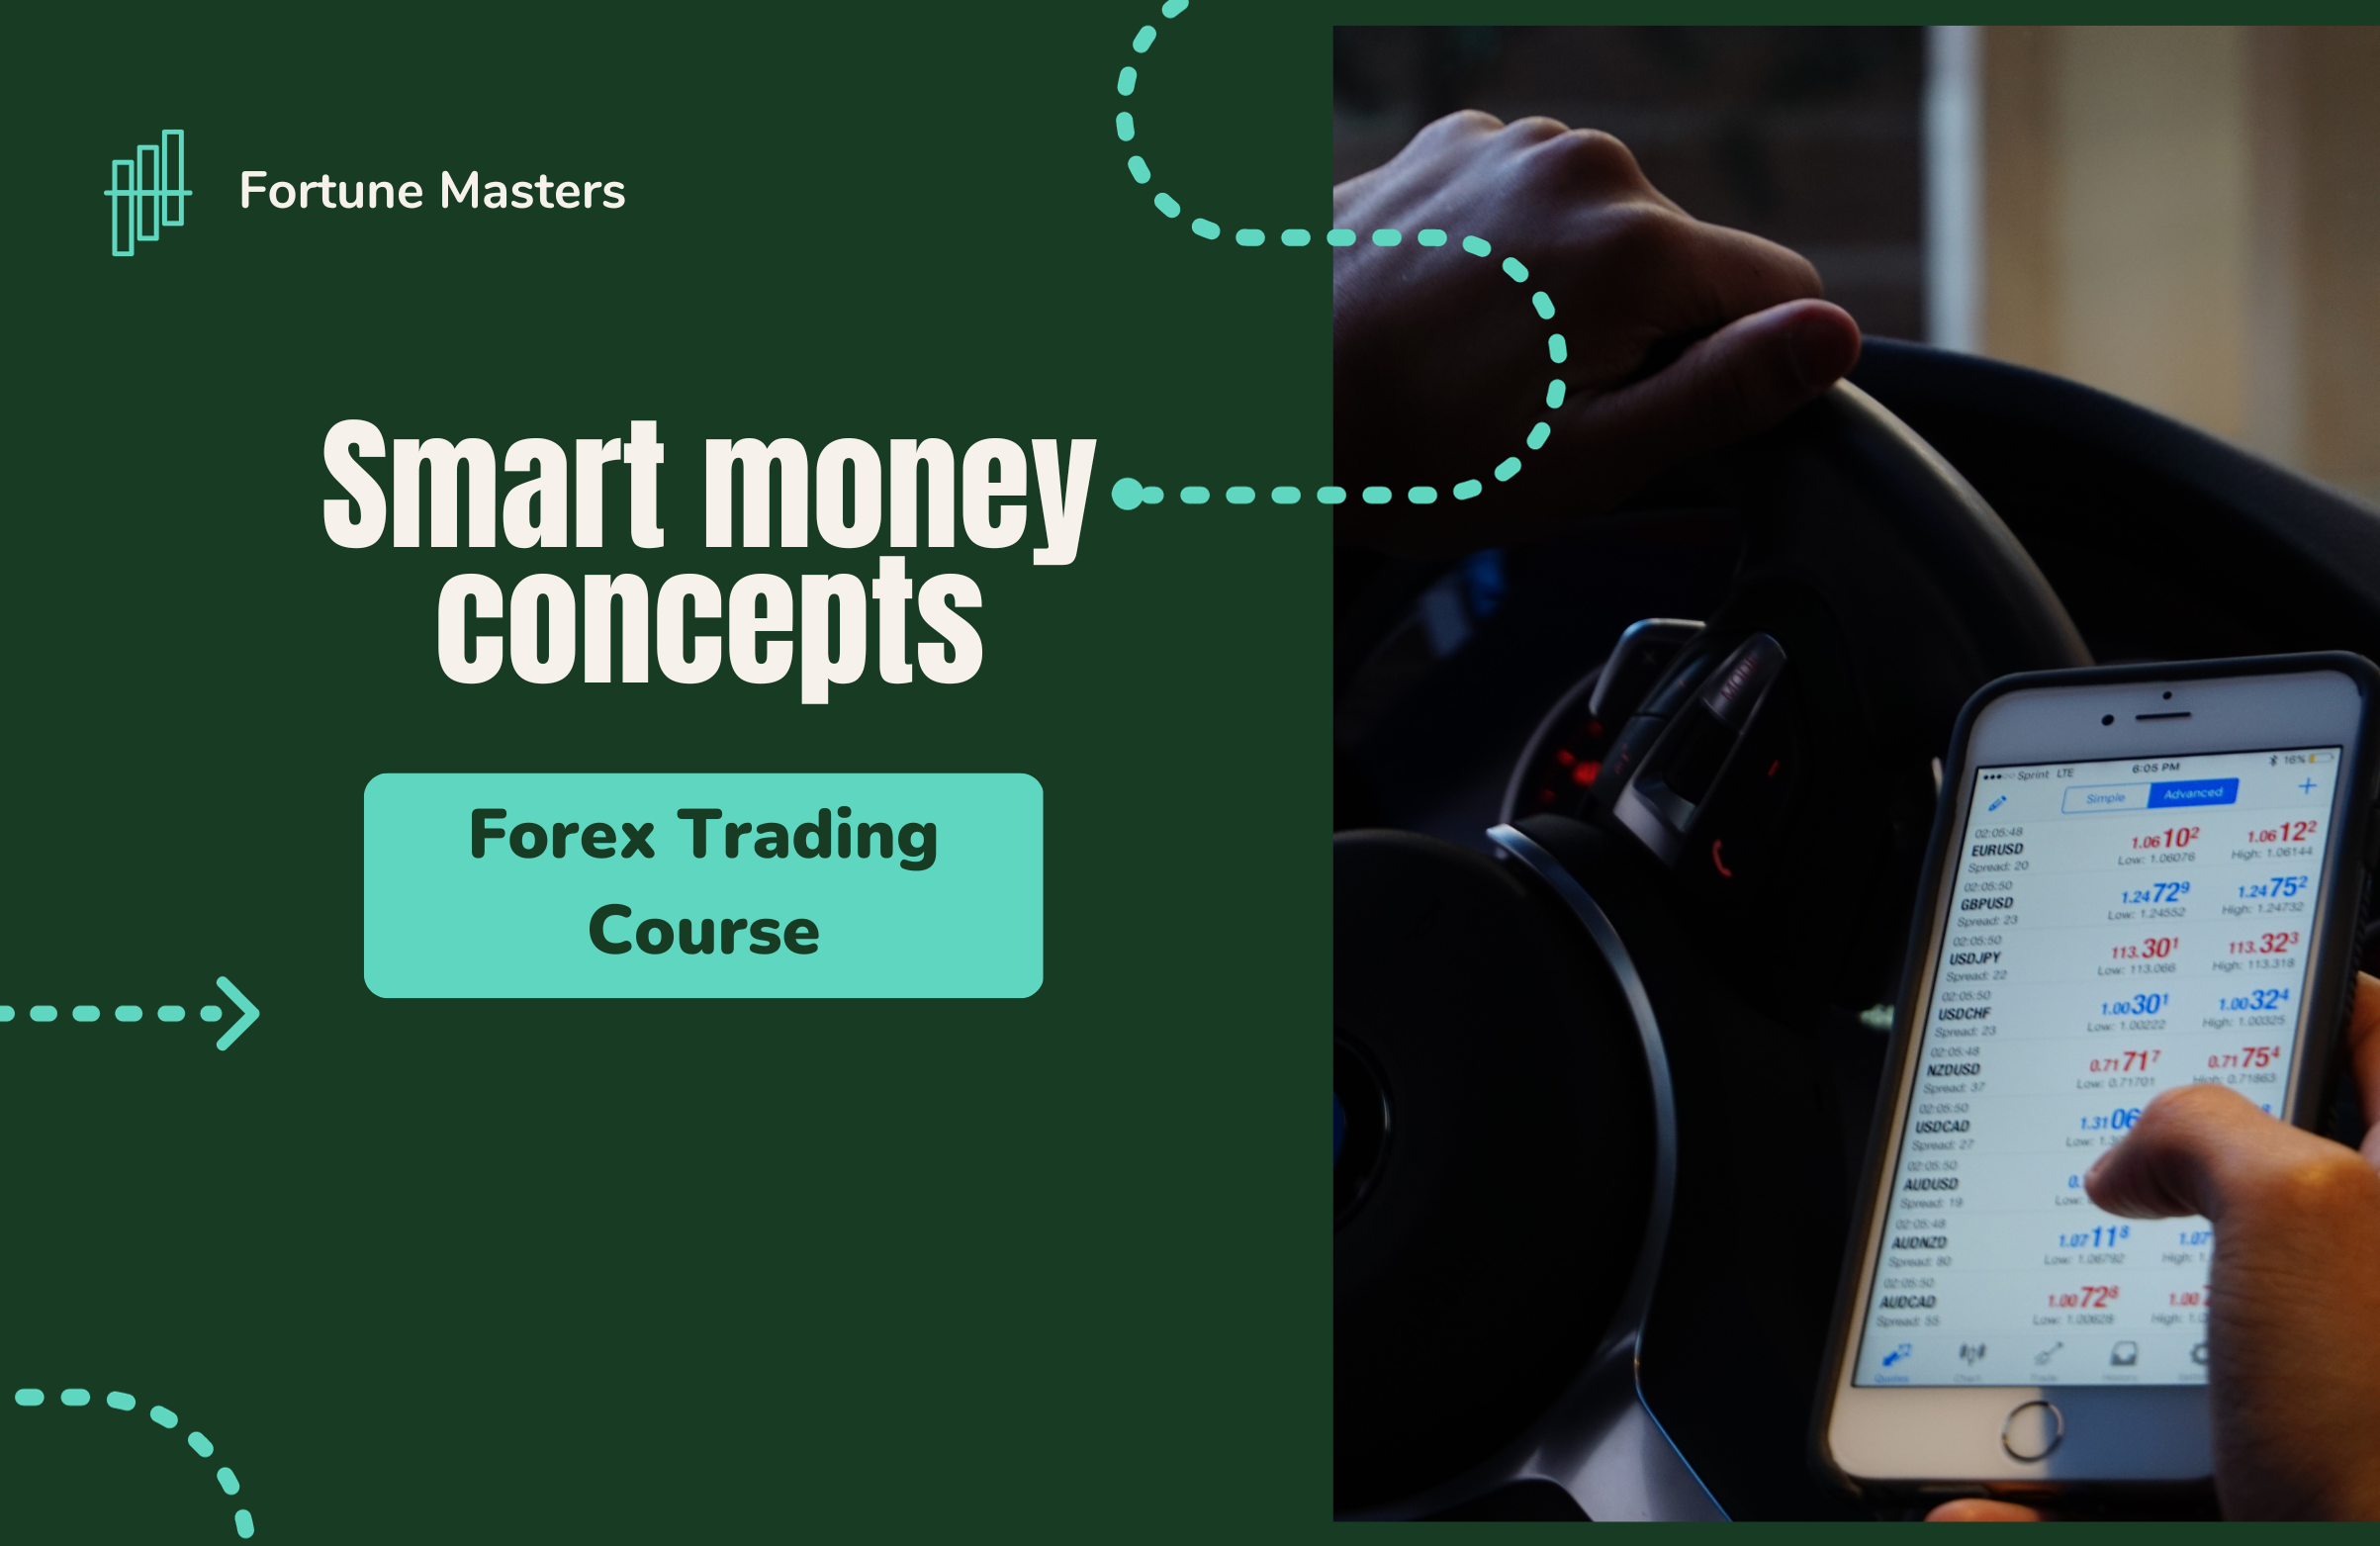 Forex training smart money concepts course by fortune masters